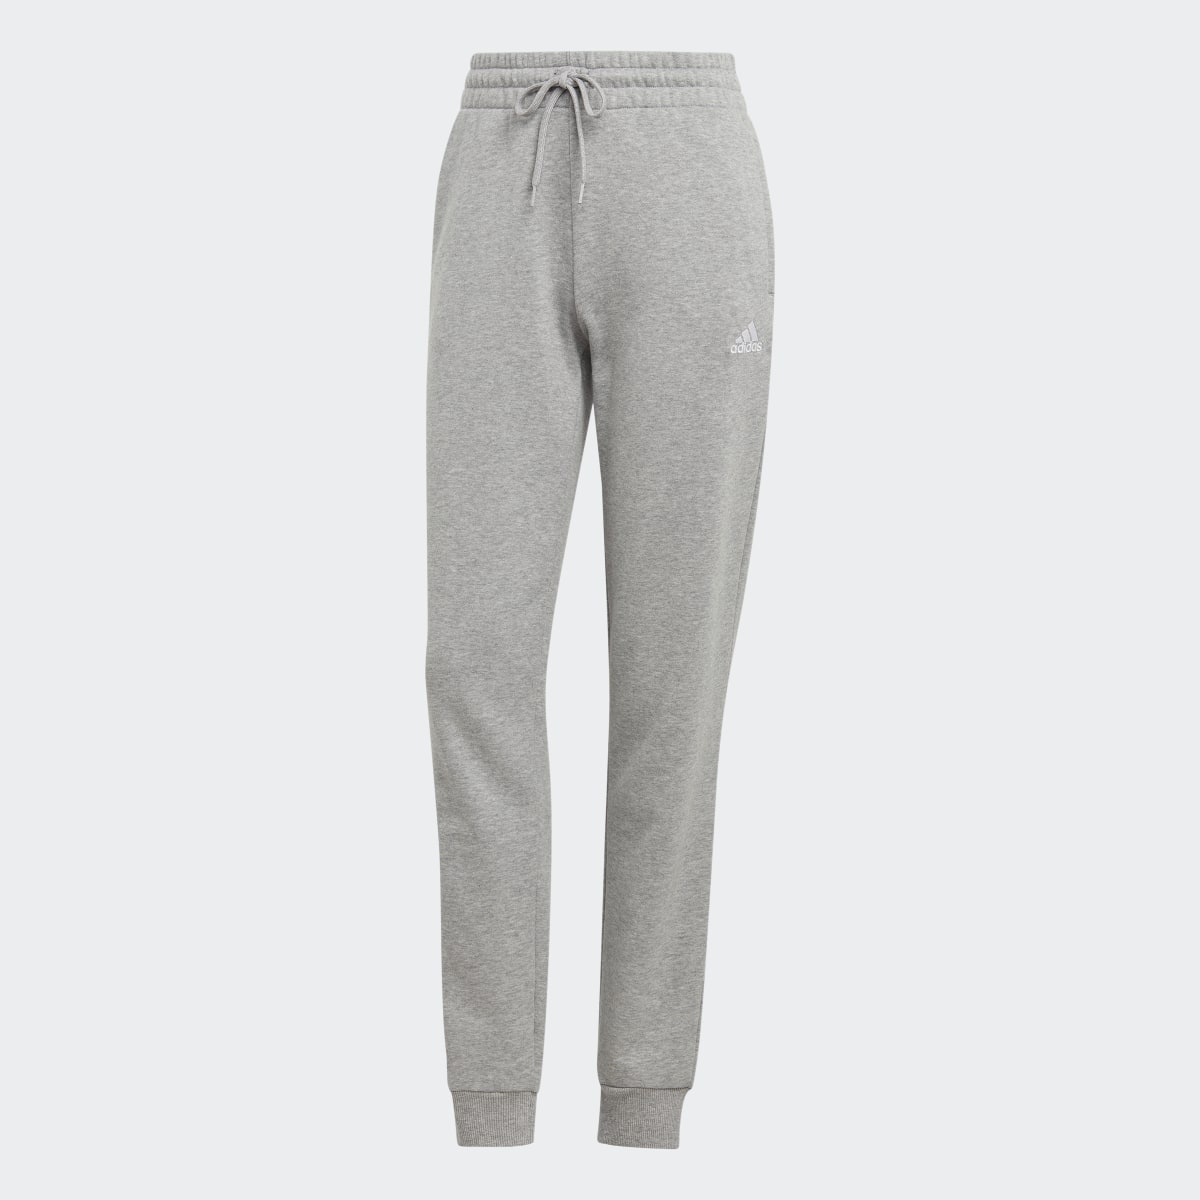 Adidas Essentials Linear French Terry Cuffed Pants. 4